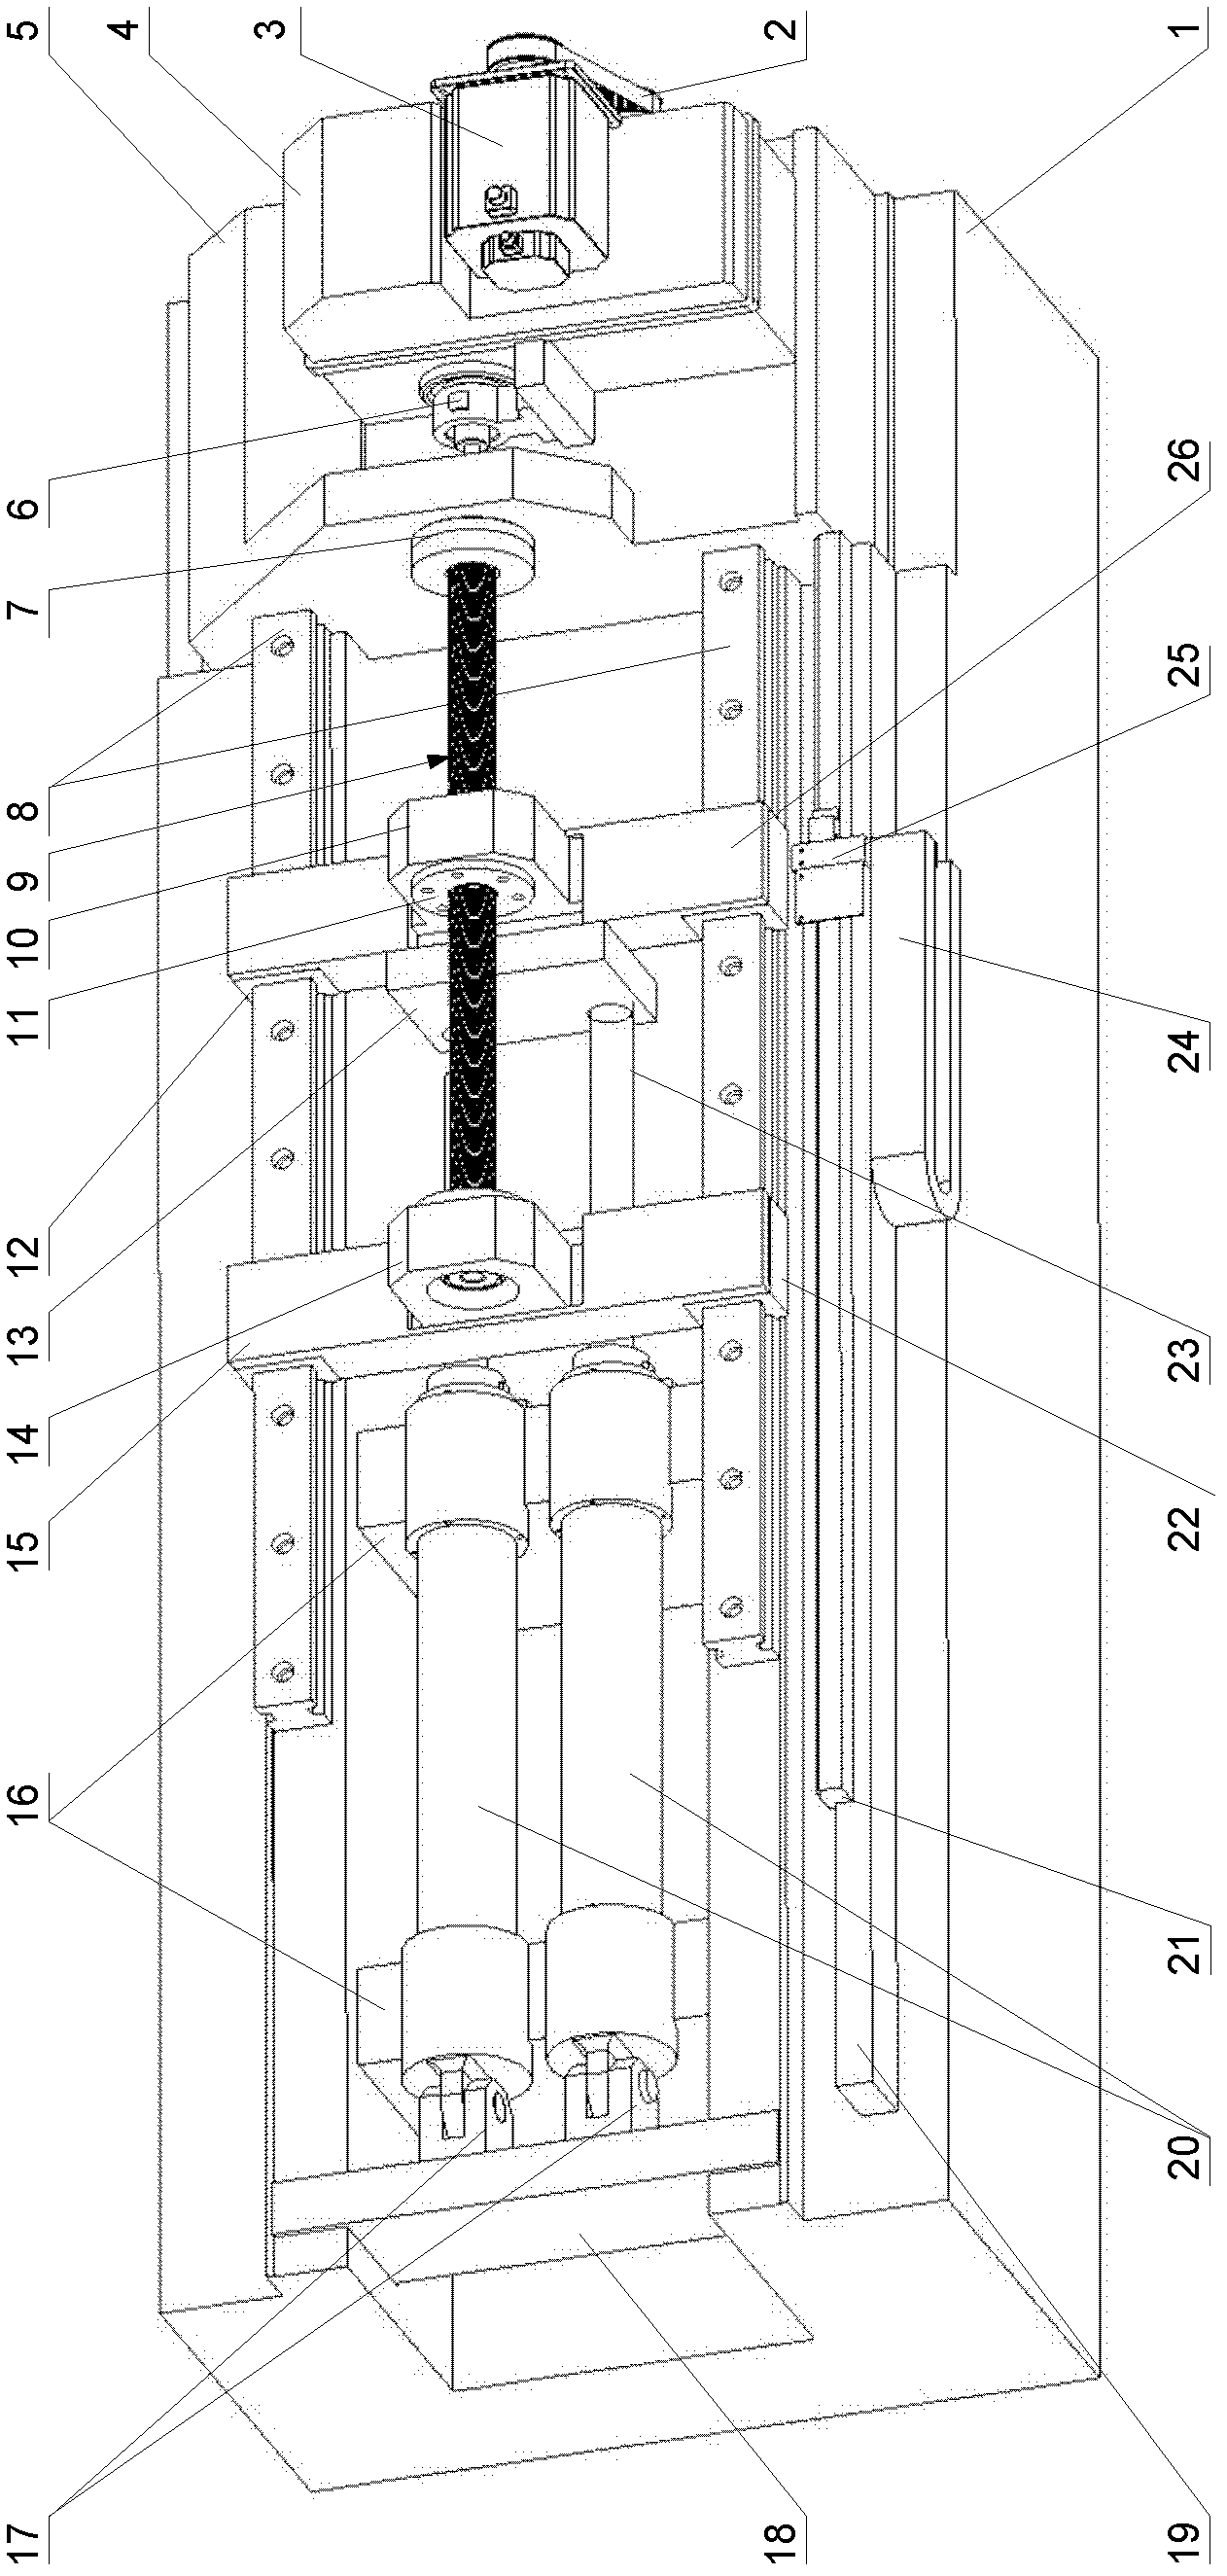 Device and method for testing precision retaining ability of ball screw assembly